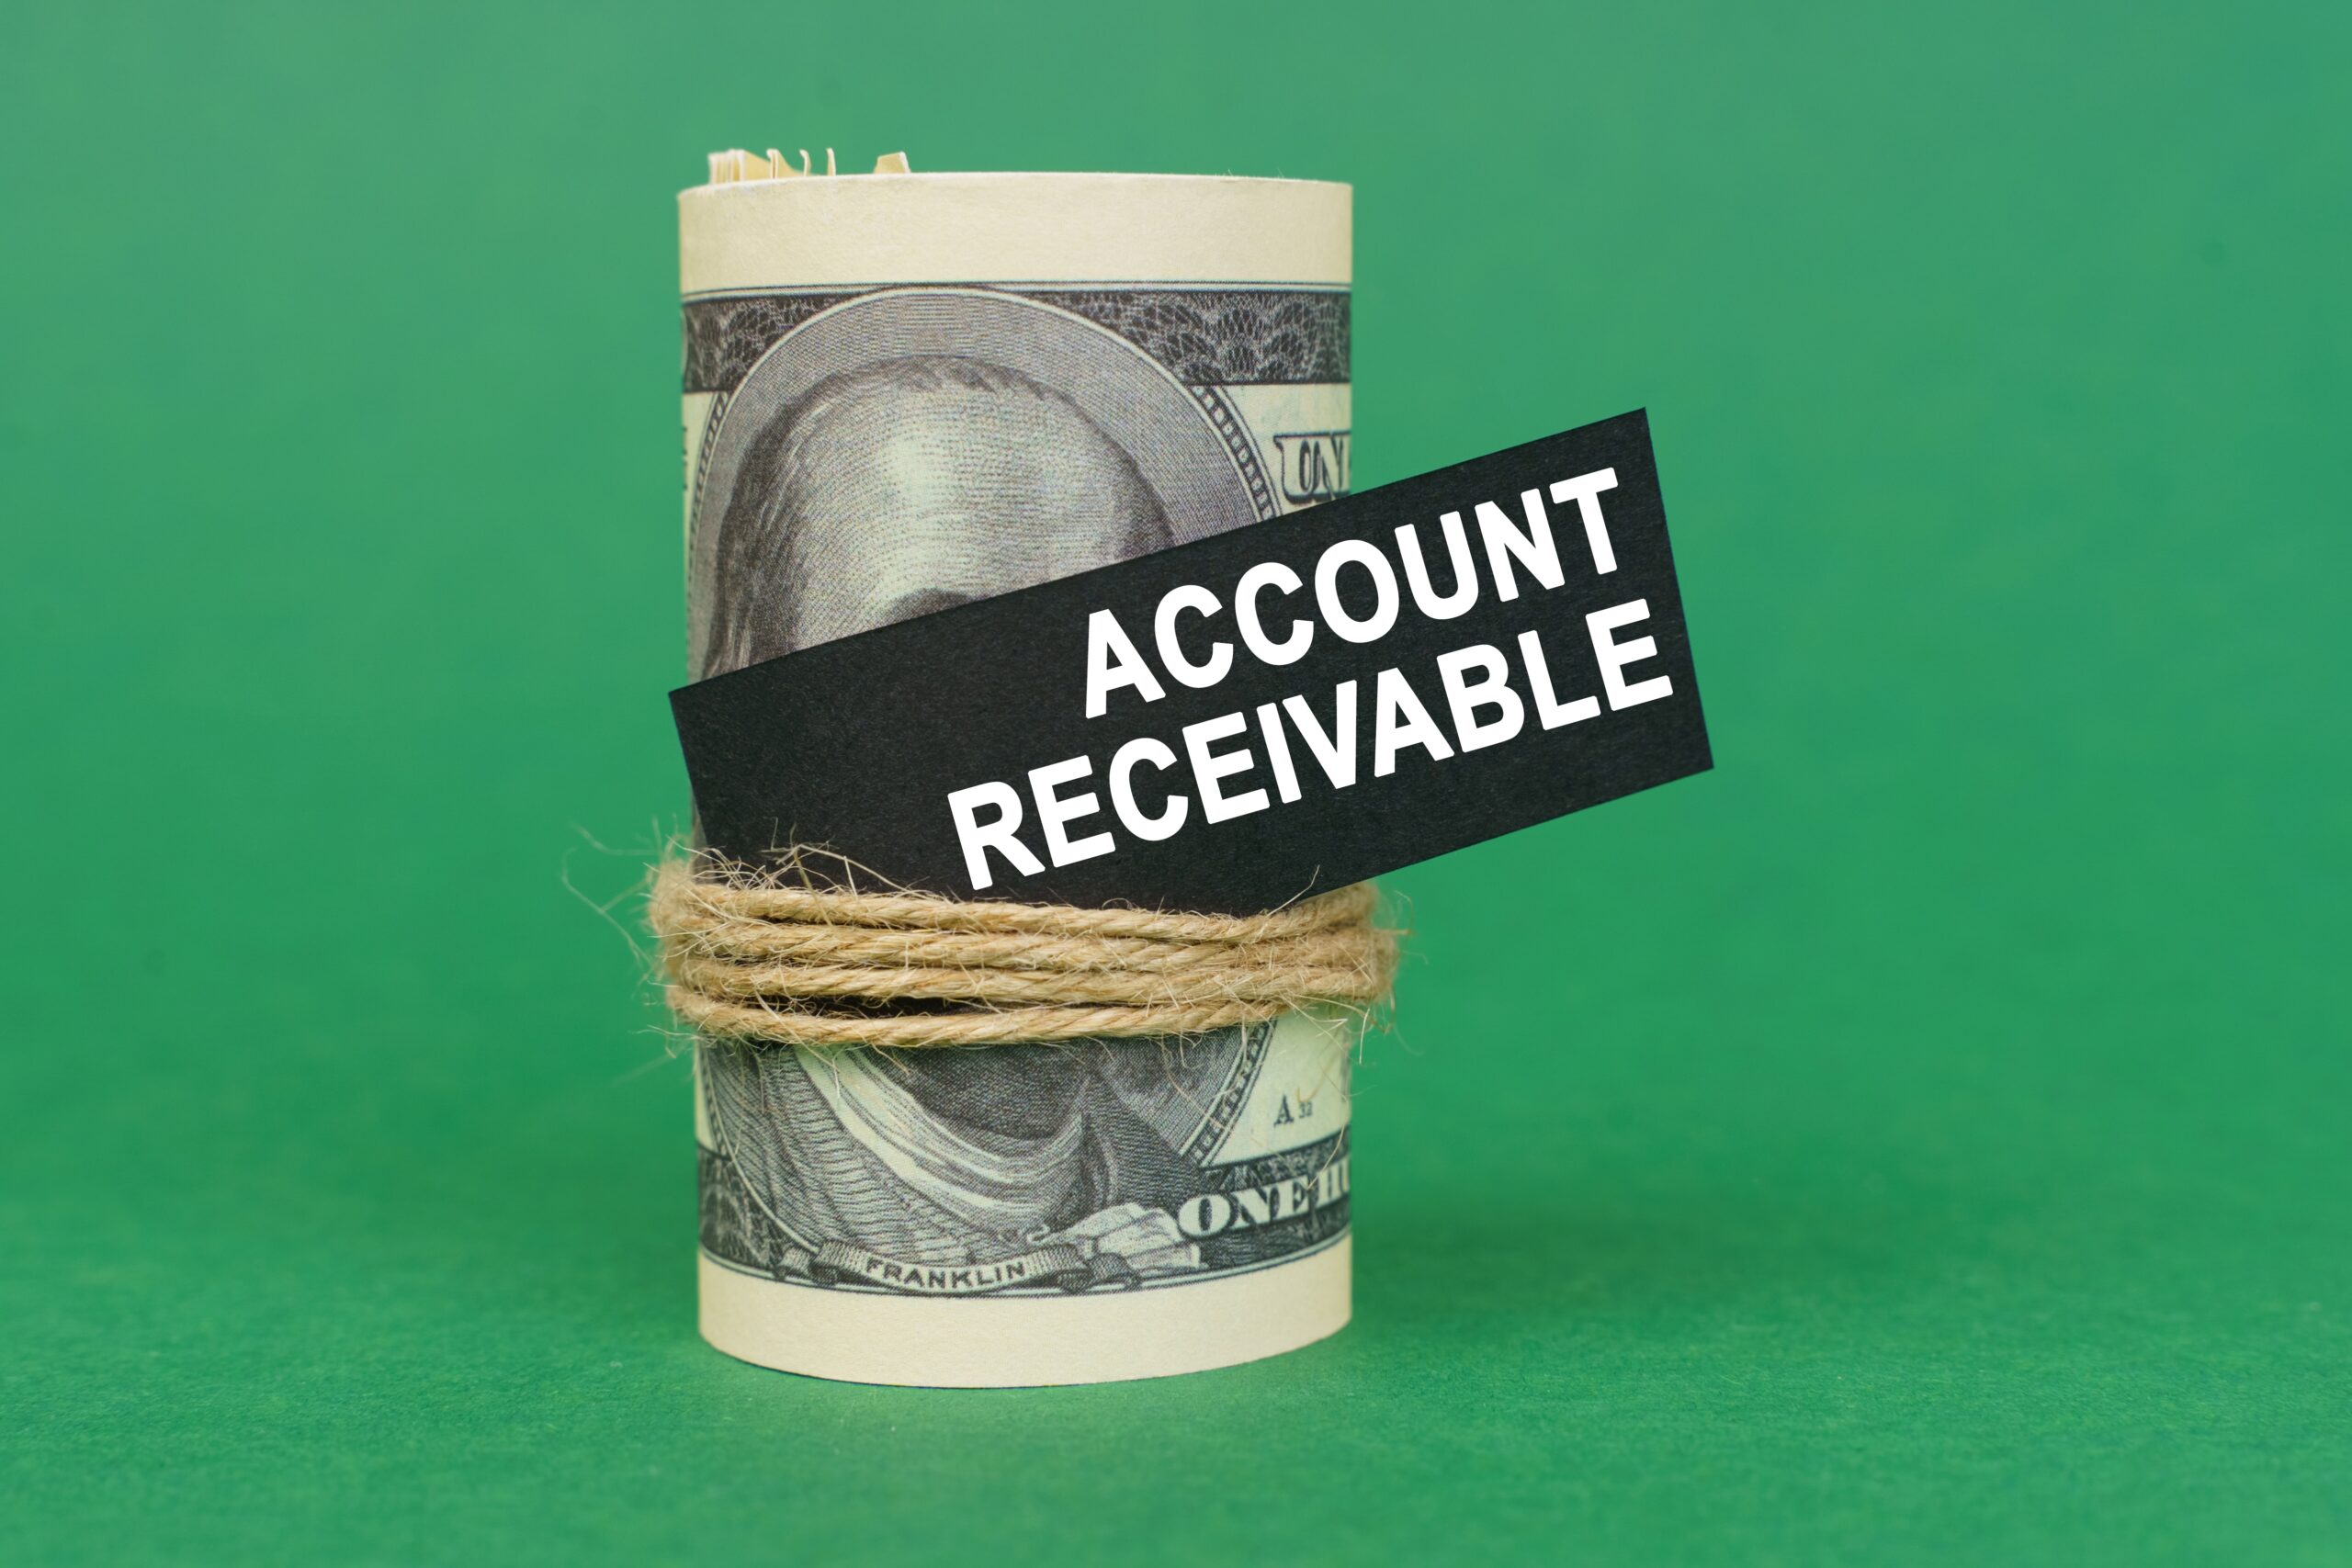 Accounts Receivable Collections